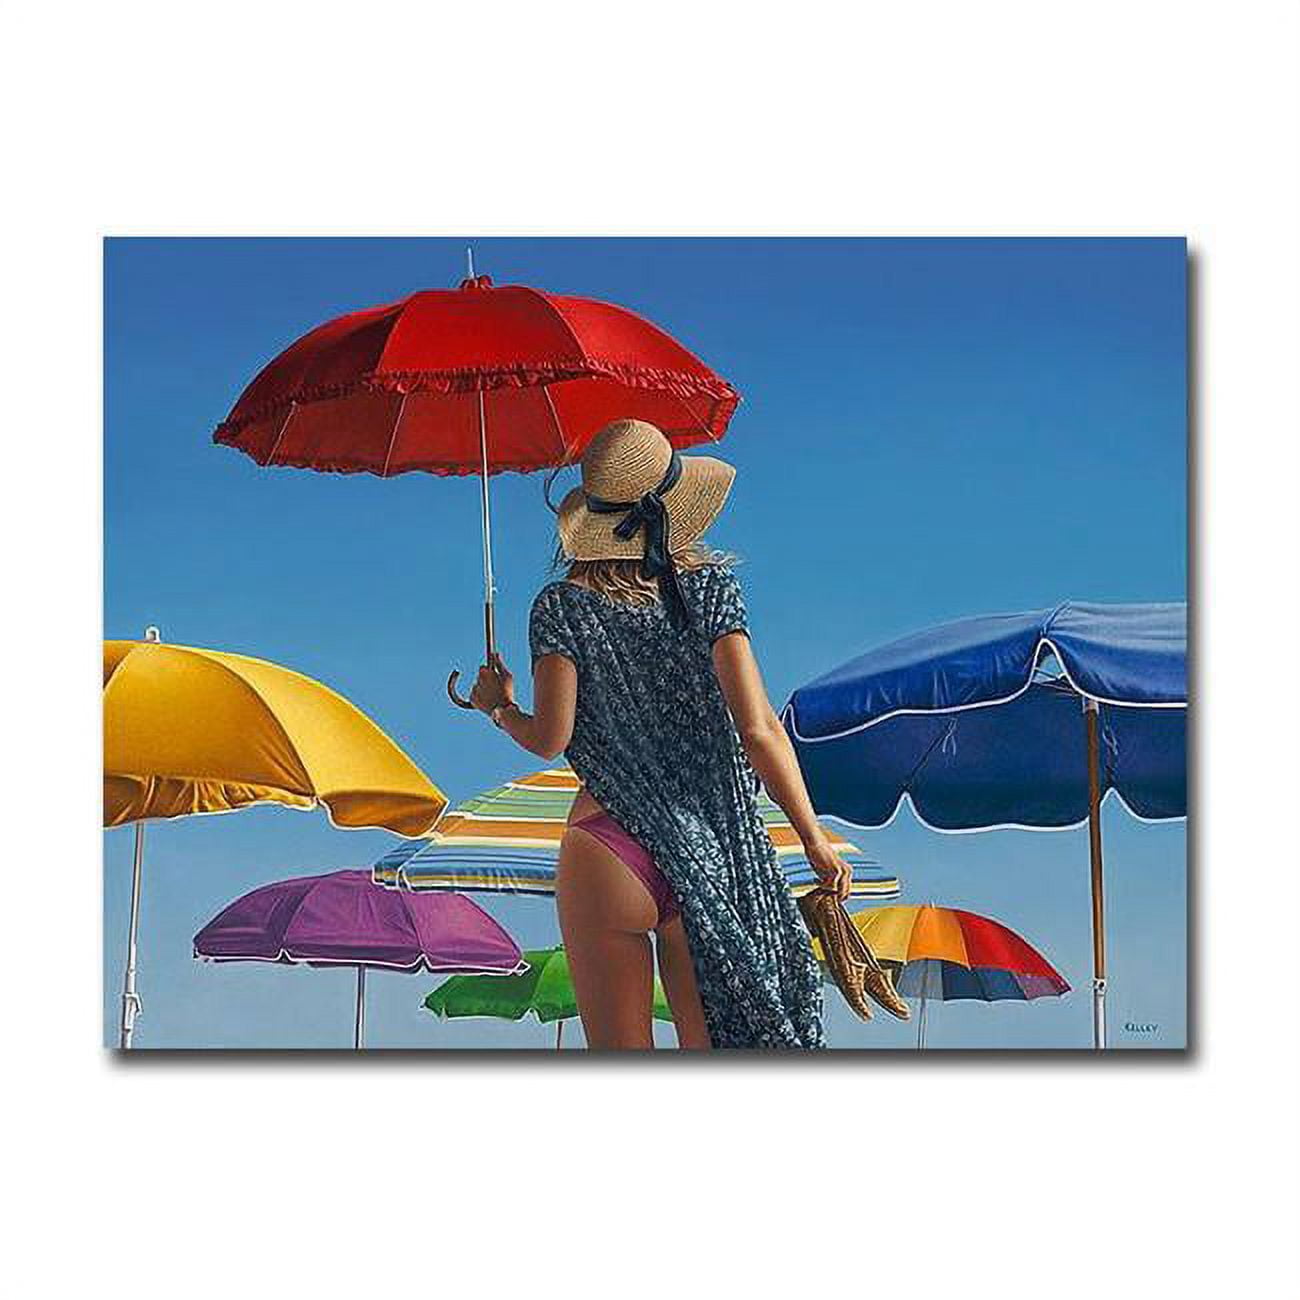 1216g309ig Canopies By Paul Kelley Premium Gallery-wrapped Canvas Giclee Art - 12 X 16 X 1.5 In.